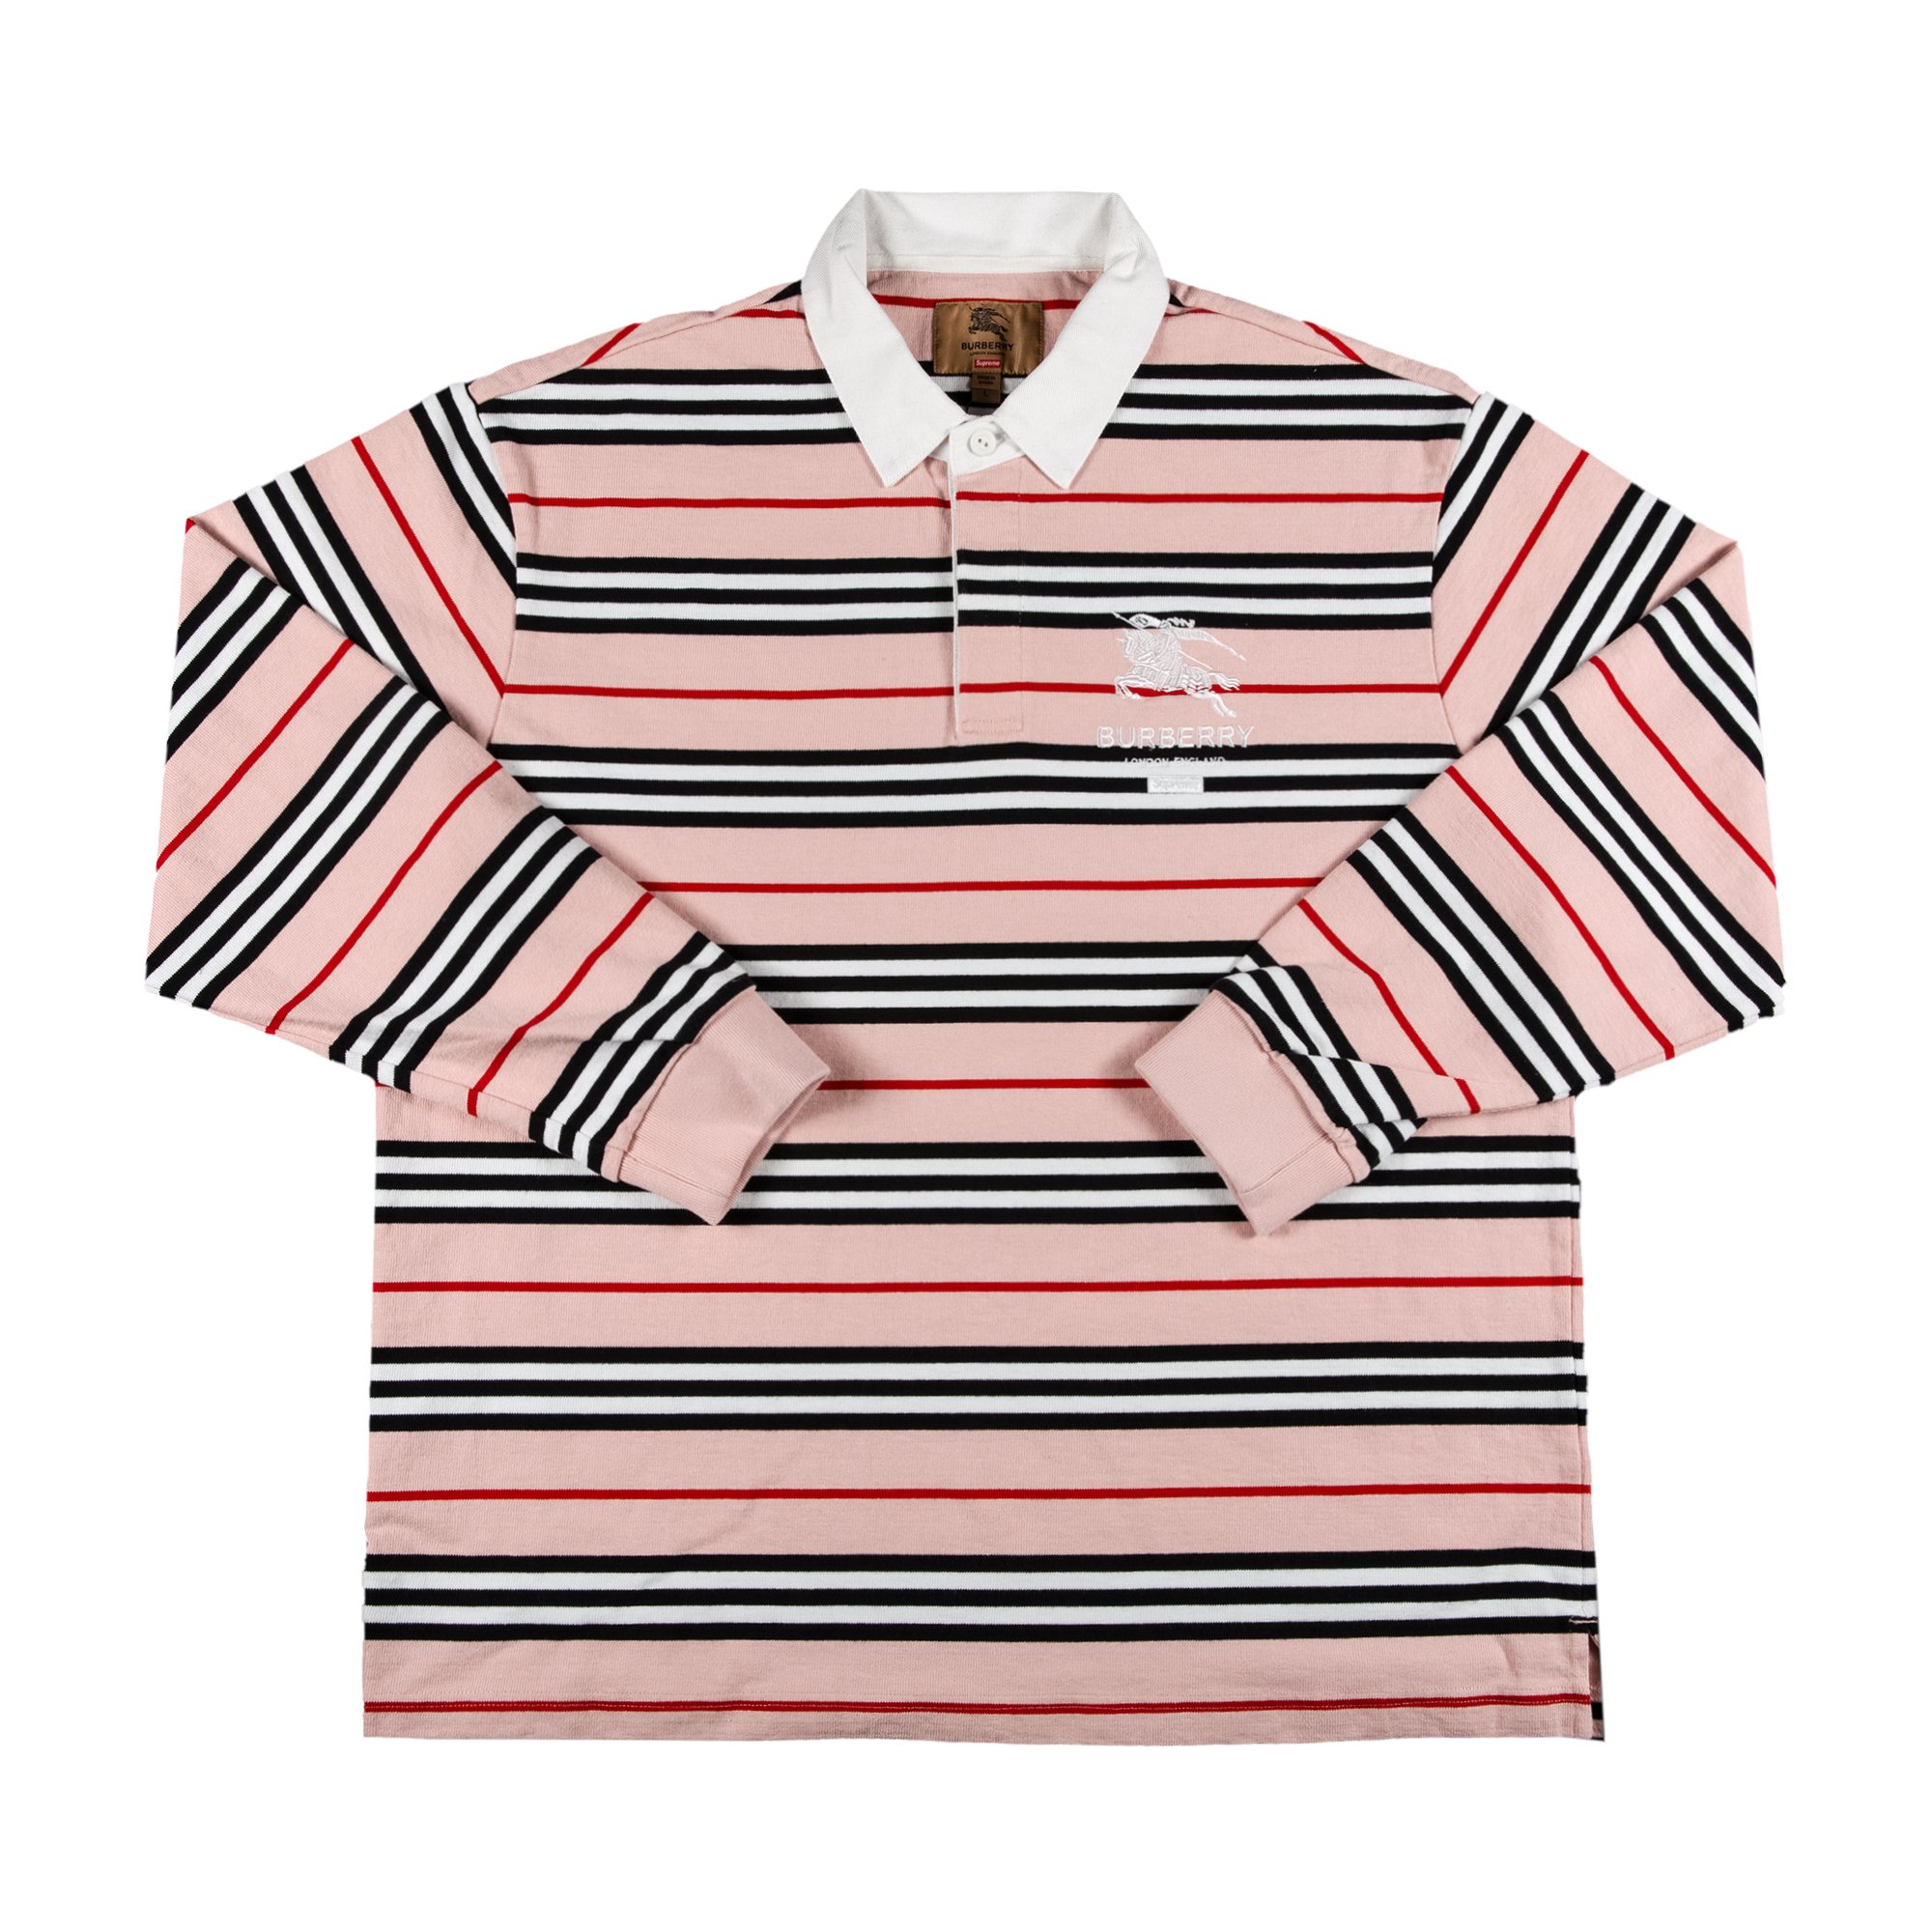 Buy Supreme x Burberry Rugby 'Pink' - SS22KN12 PINK | GOAT SA